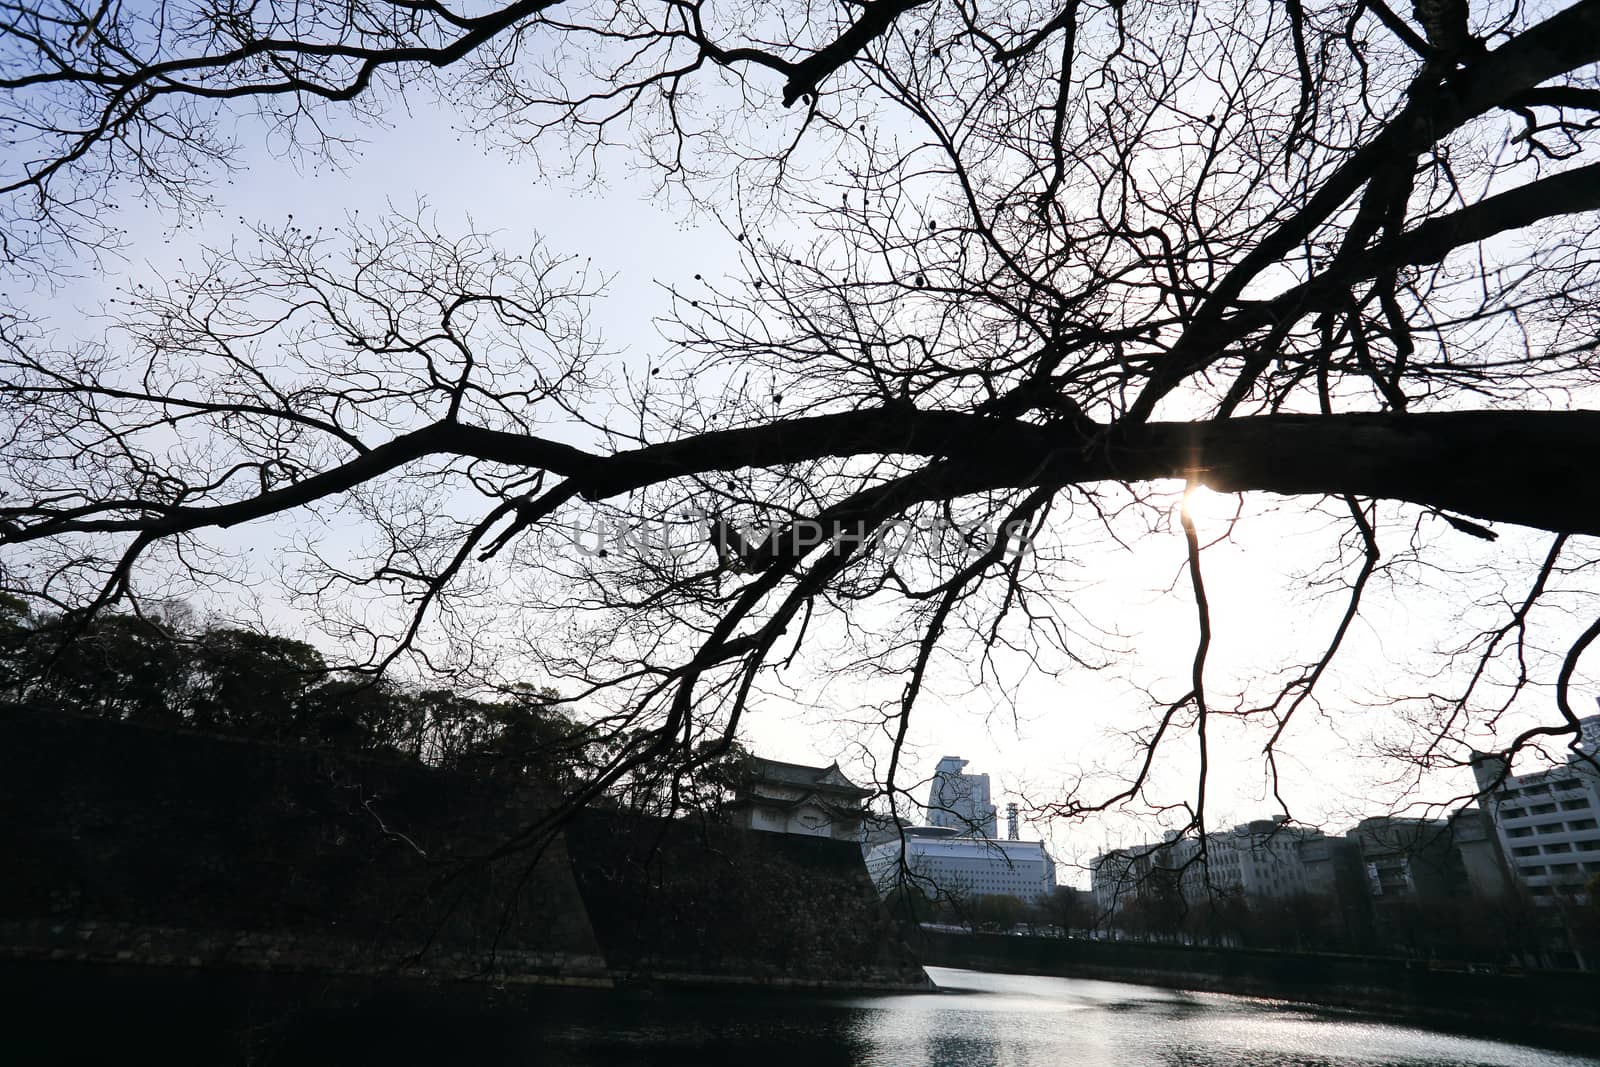 A moat surrounding Osaka castle in Japan, winter by rufous